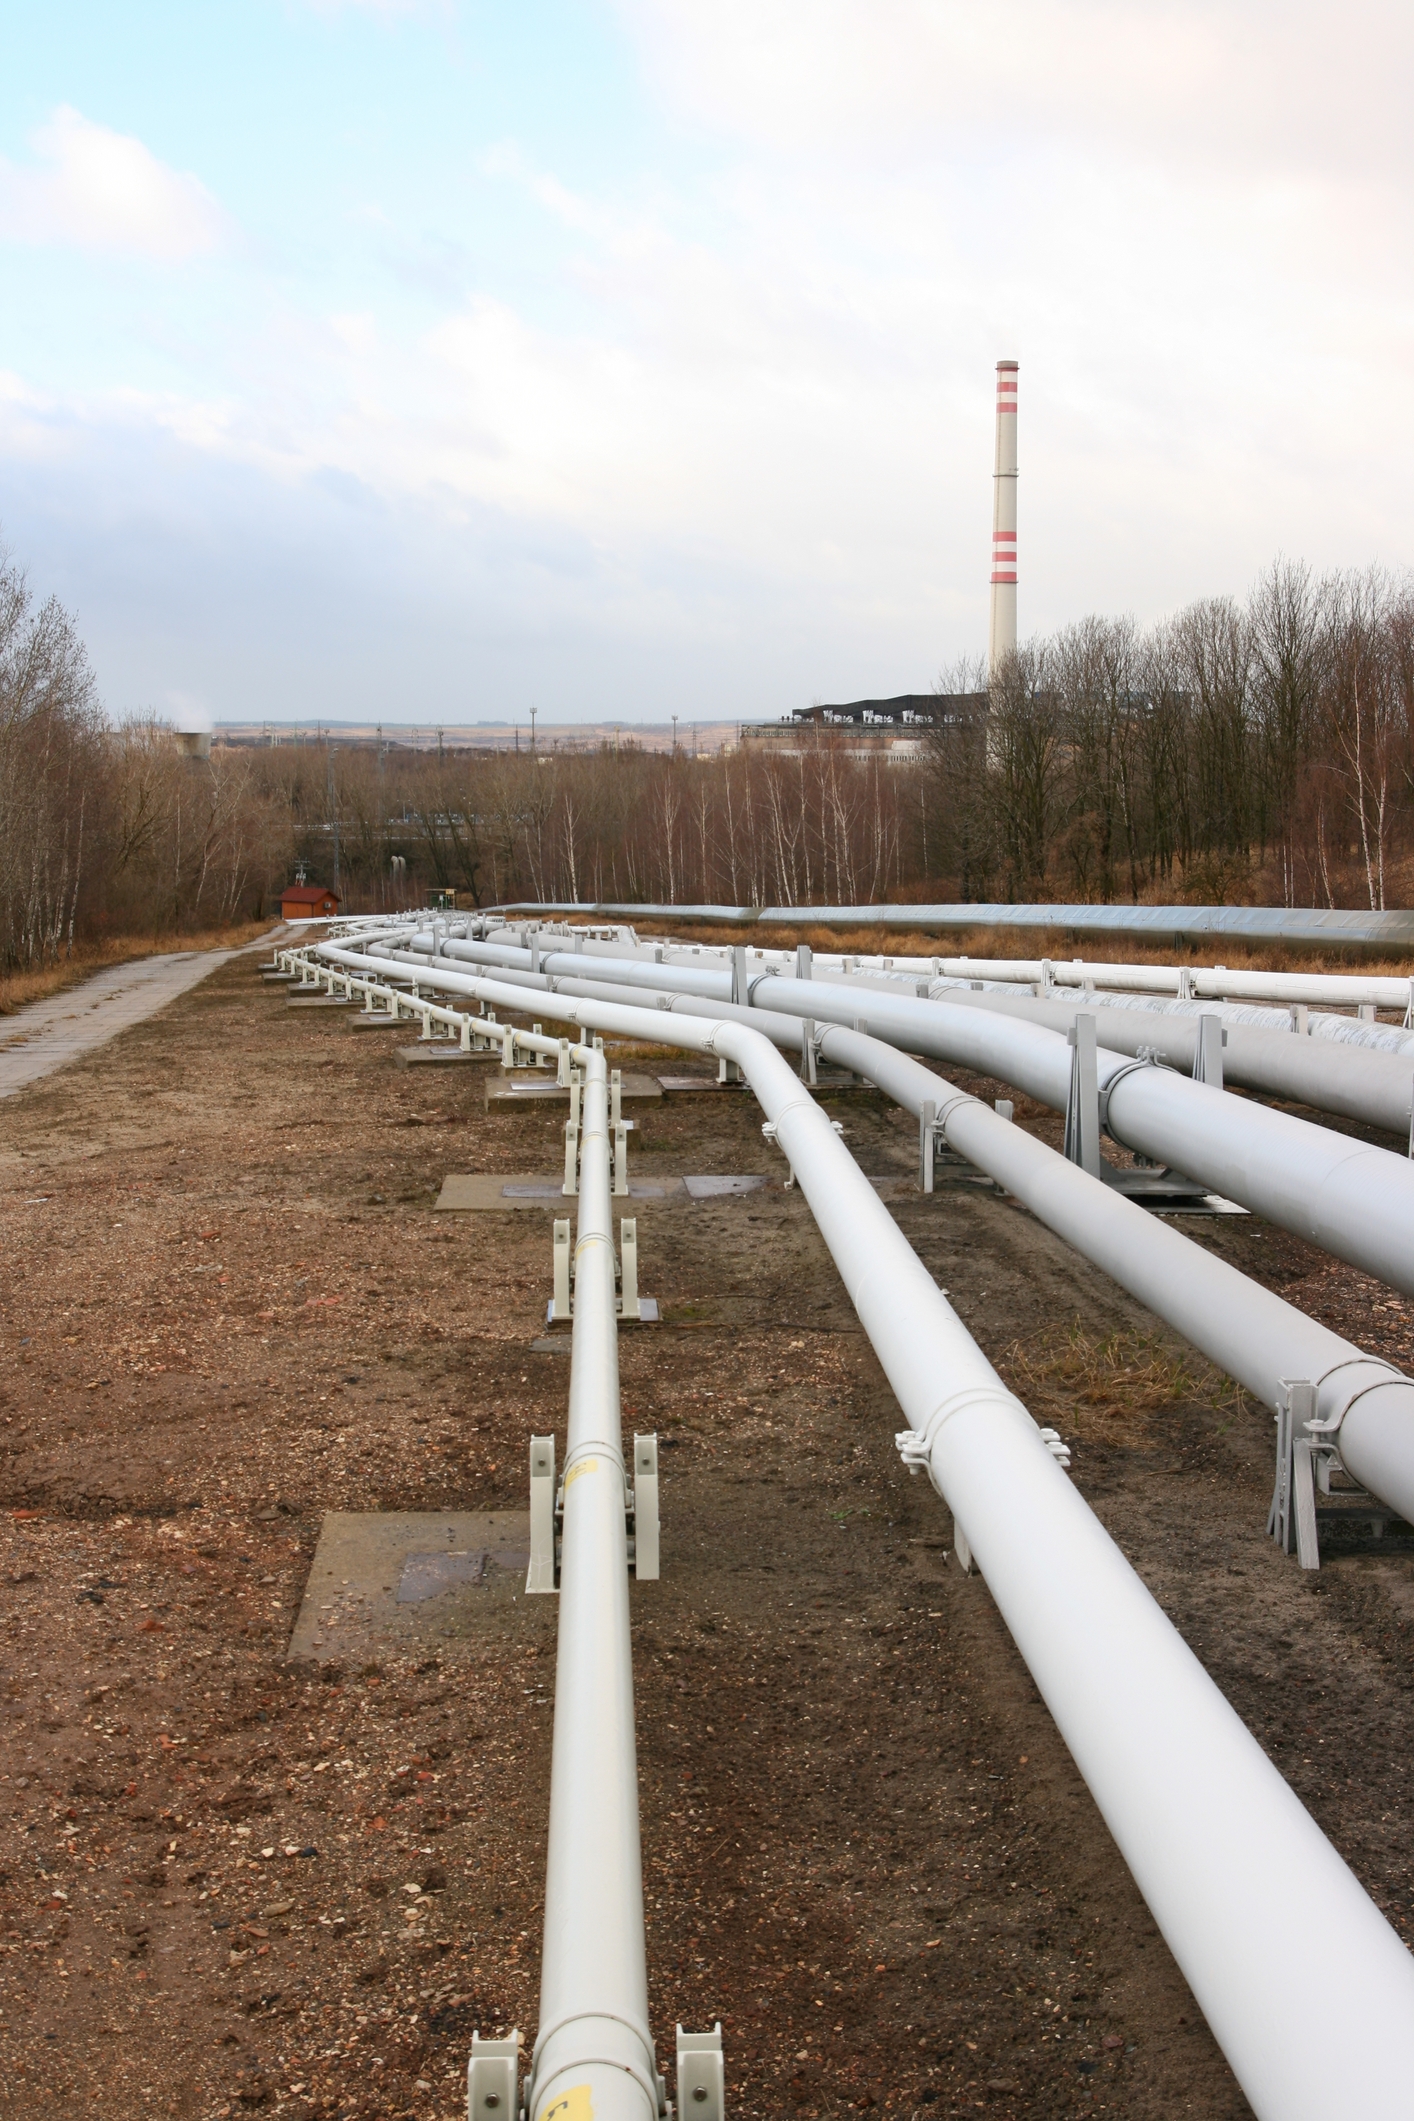 Pipeline - A system of pipe/pipes used to transport oil and/or gas to a main gathering point to be sold. (CEG Holdings, LLC.)